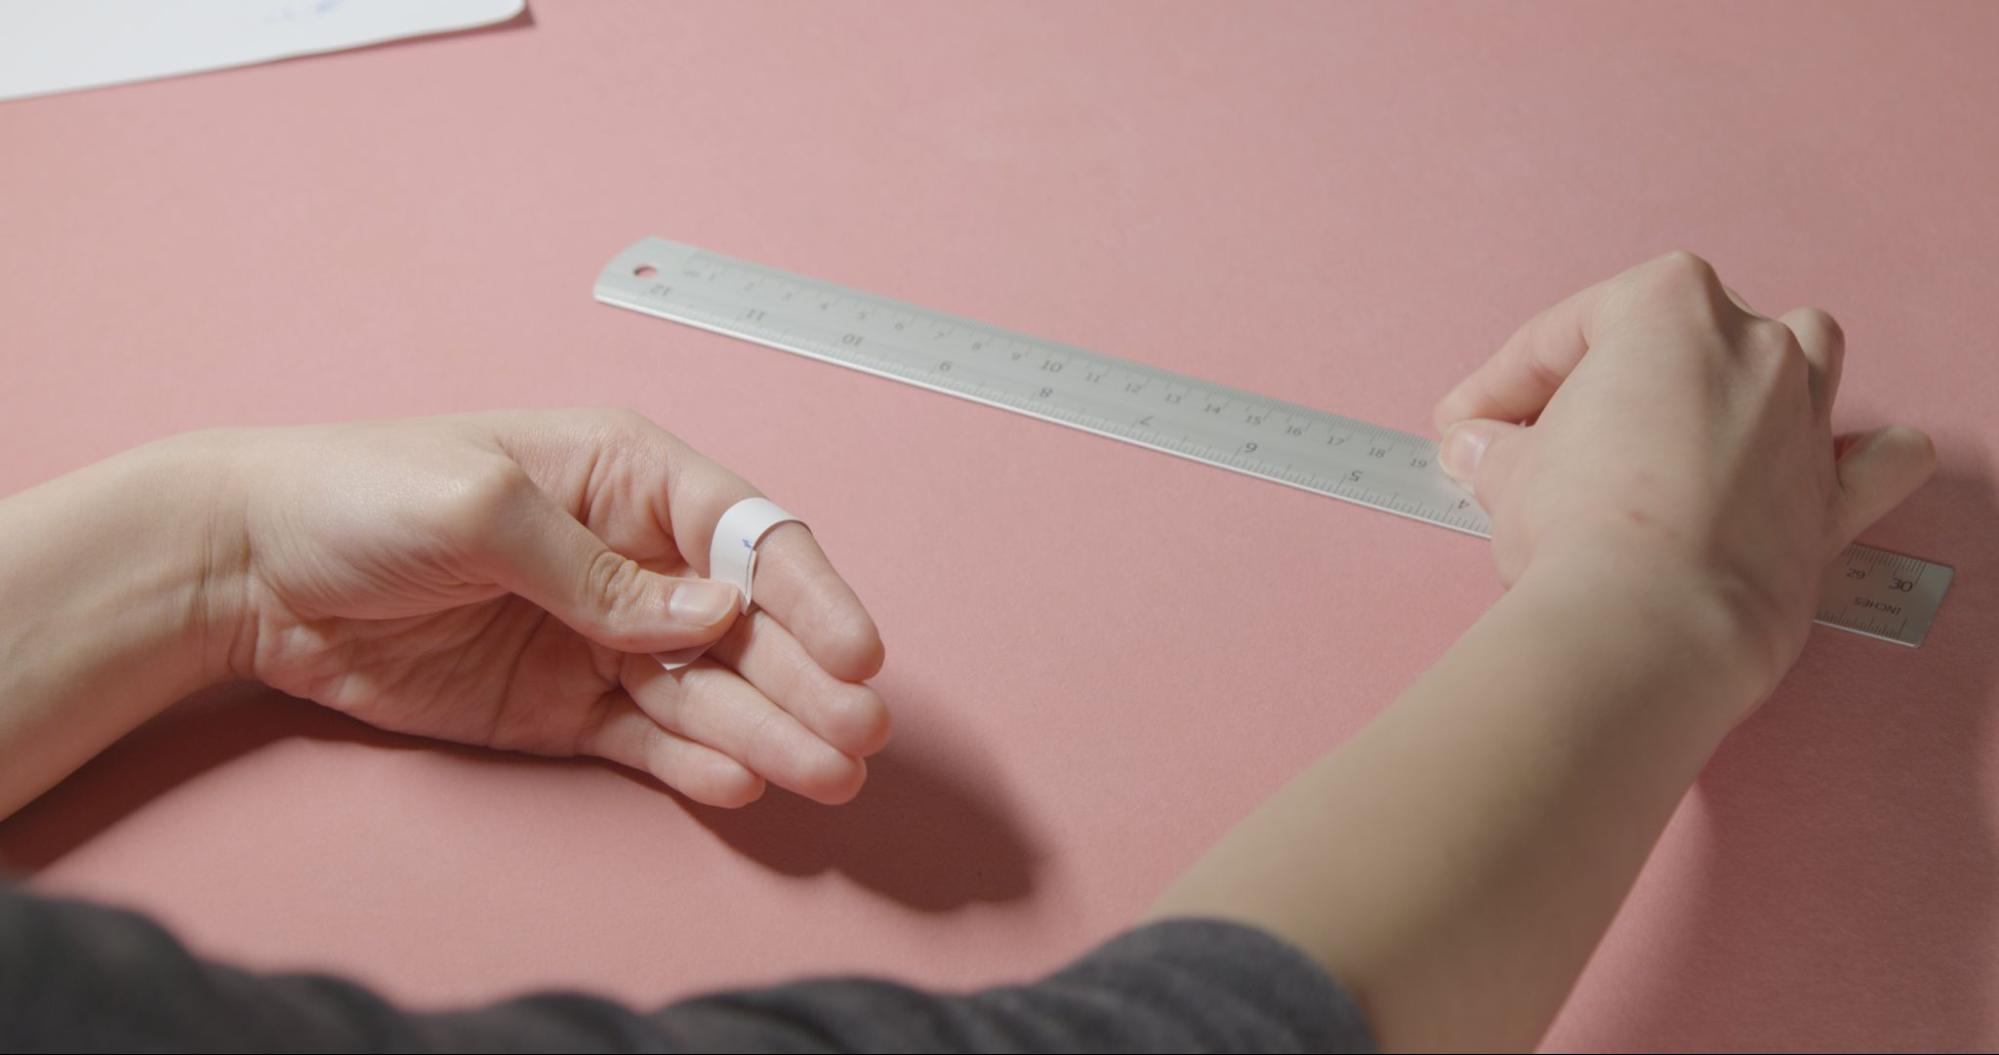 A woman demonstrates how to find a woman's engagement ring with a ruler and measuring band